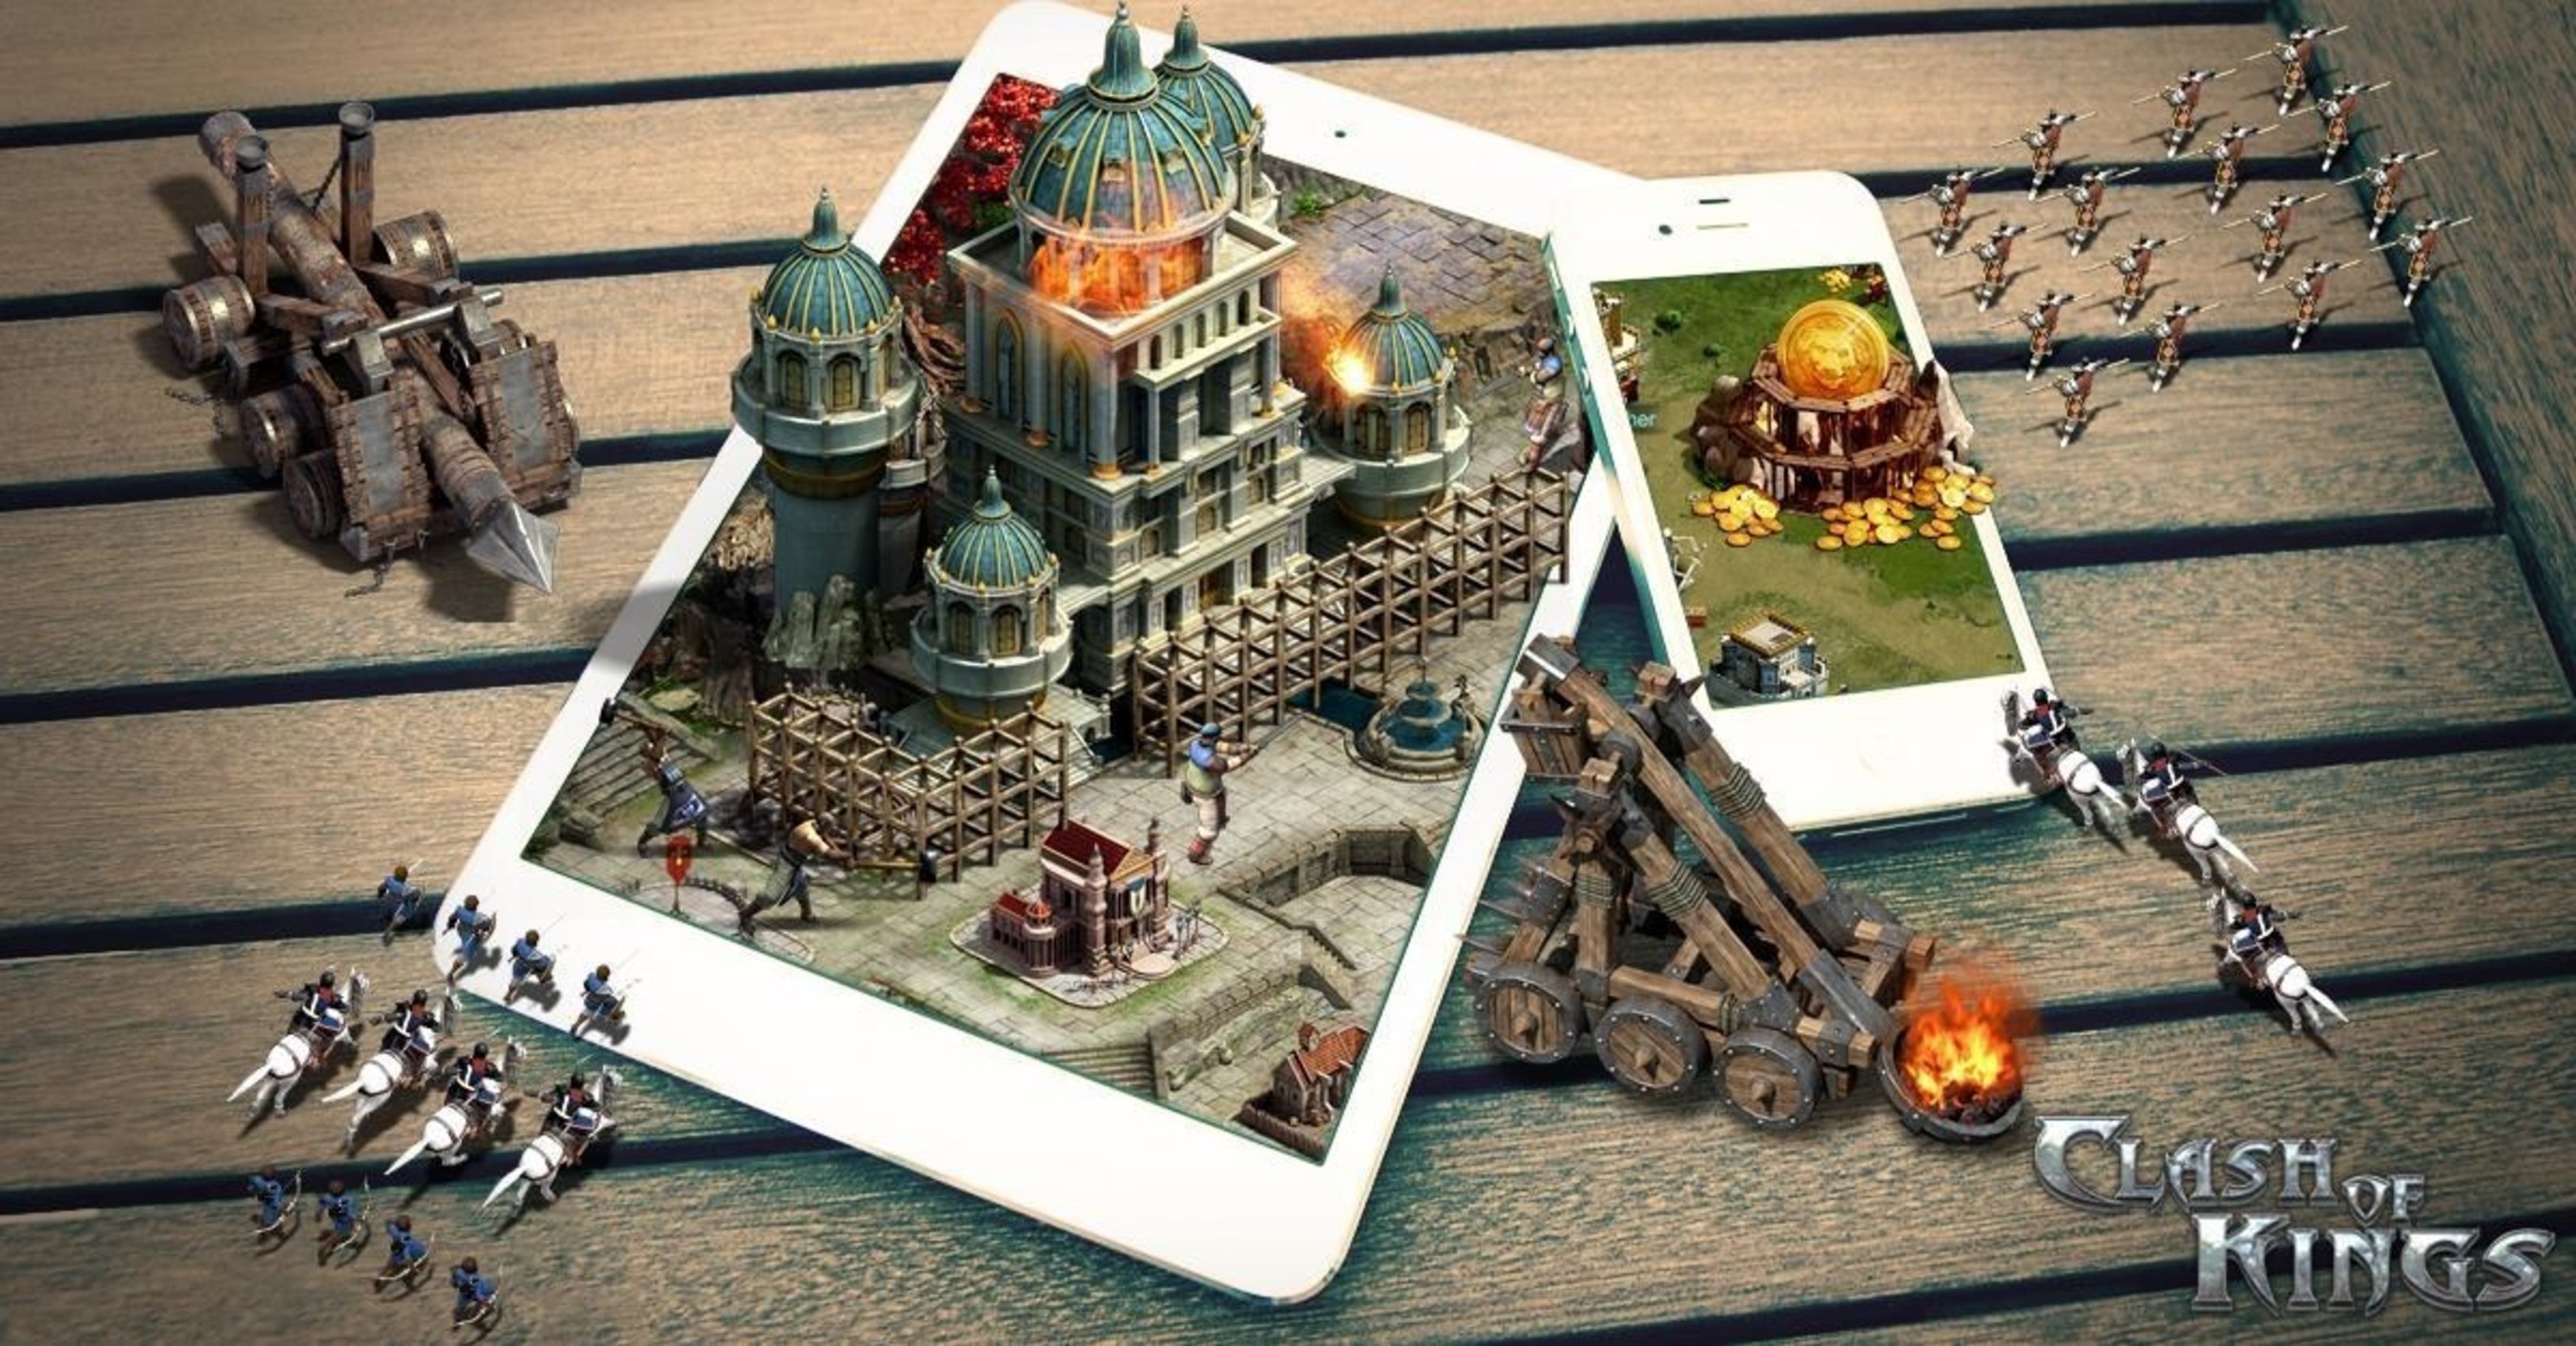 Clash of Kings is a real-time strategy game where players build an empire and defend it